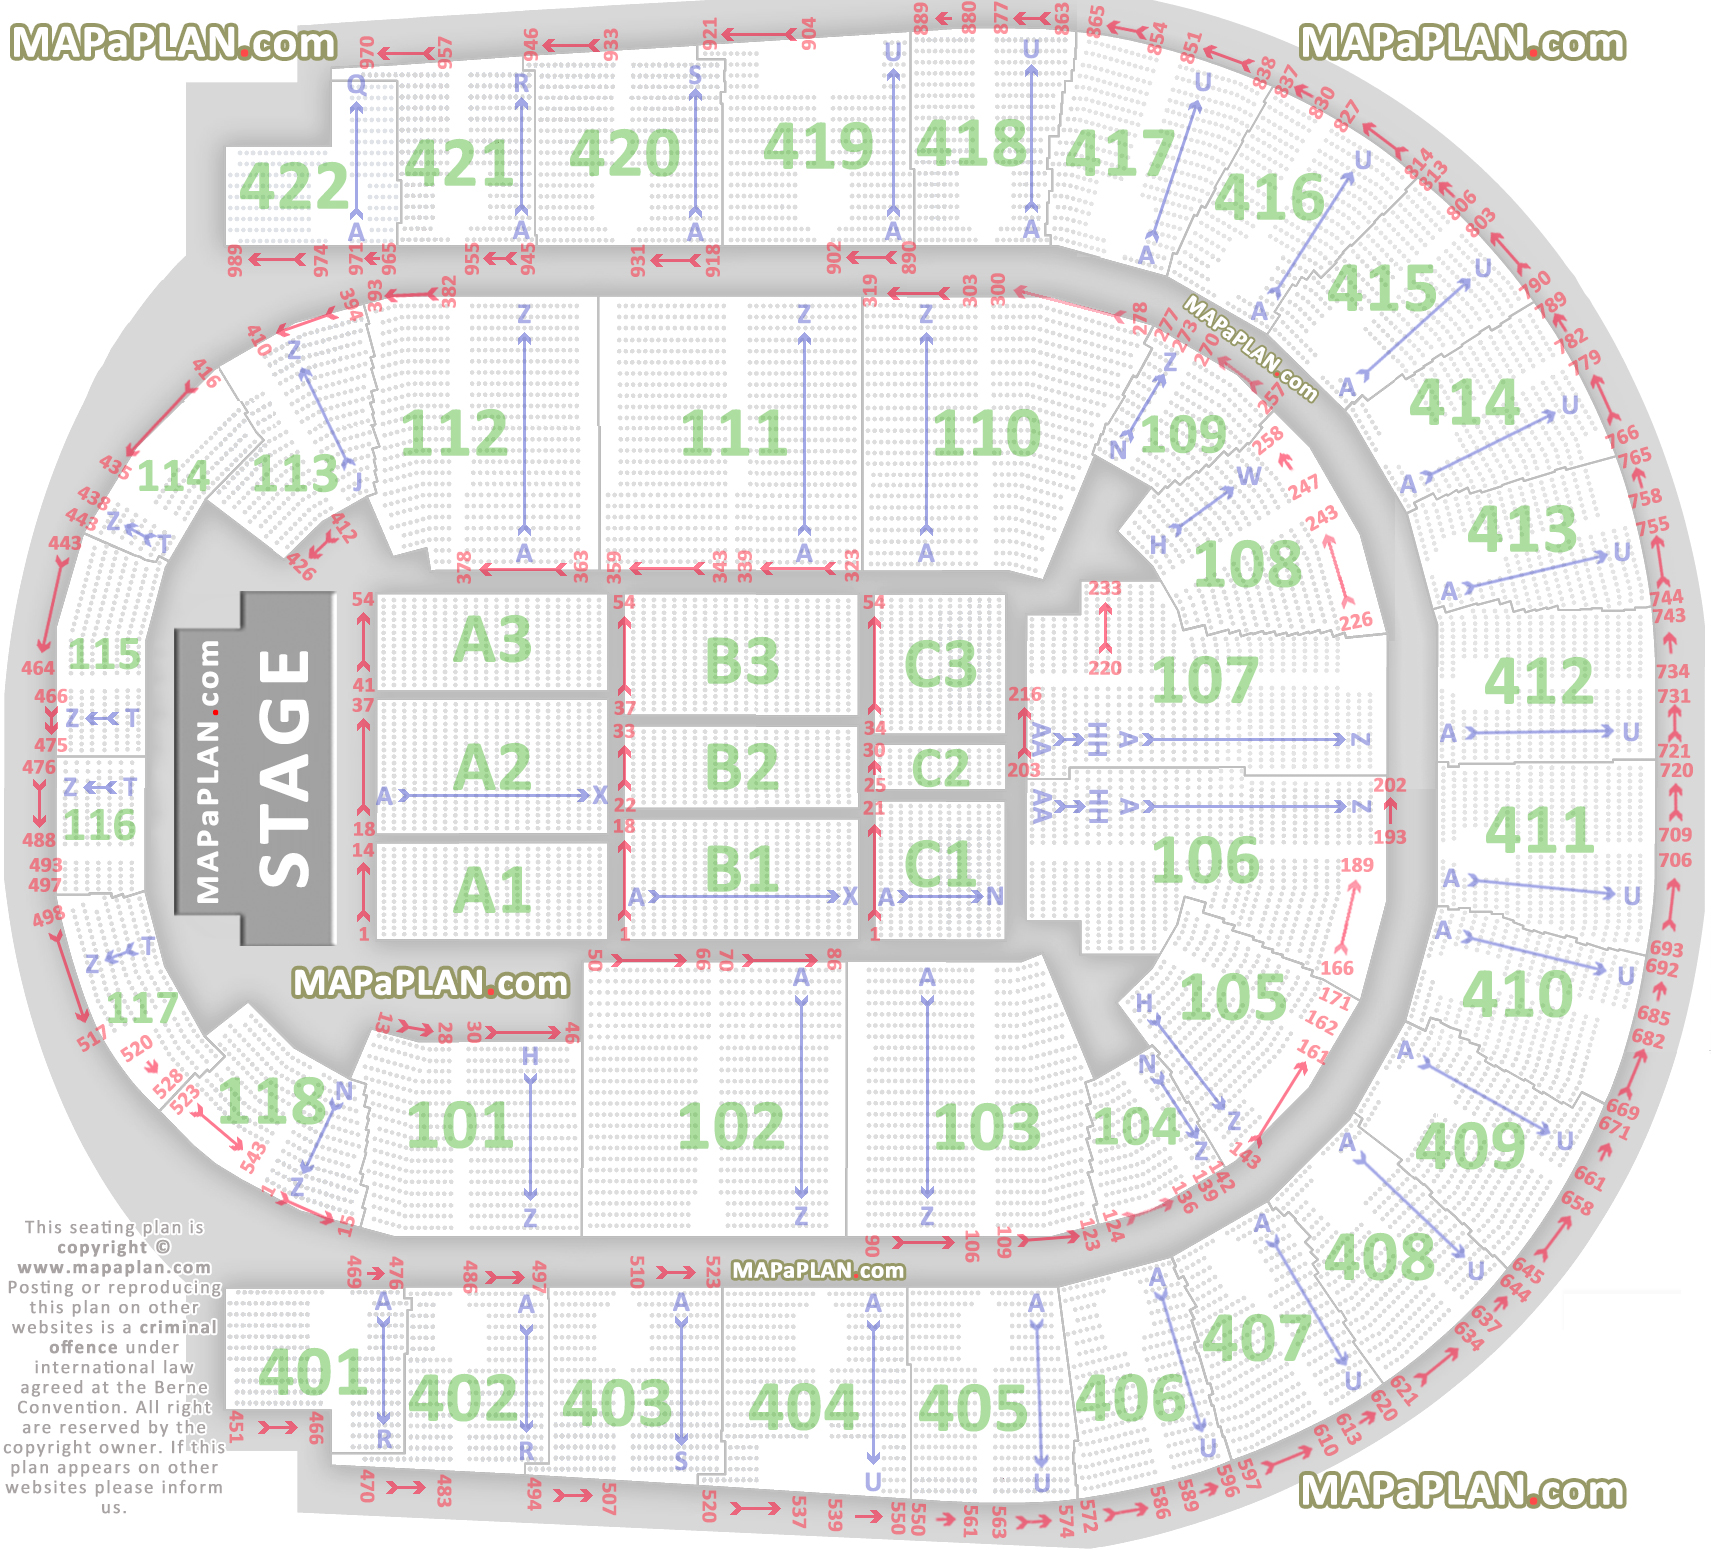 The O2 Arena London seating plan Detailed seats rows and blocks numbers chart